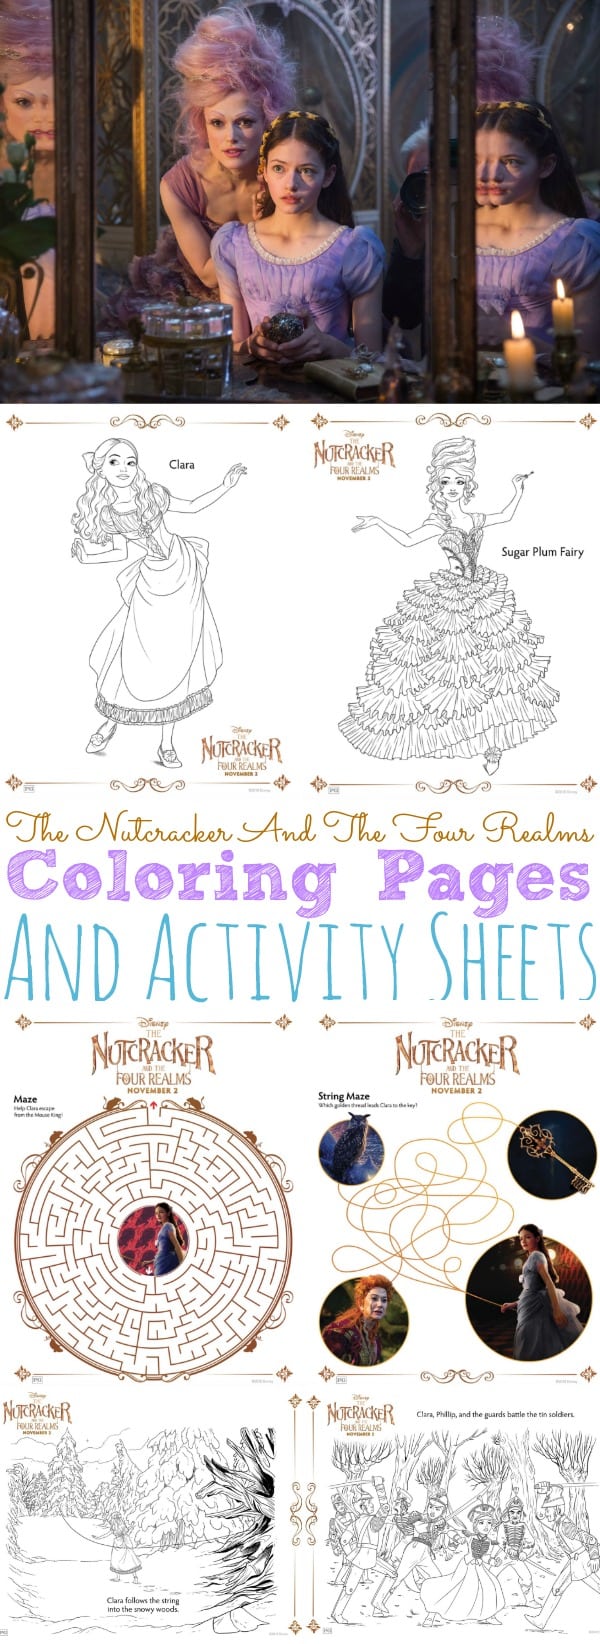 Free The Nutcracker And The Four Realms Coloring Pages and Activity Sheets #DisneysNutcrackerEvent